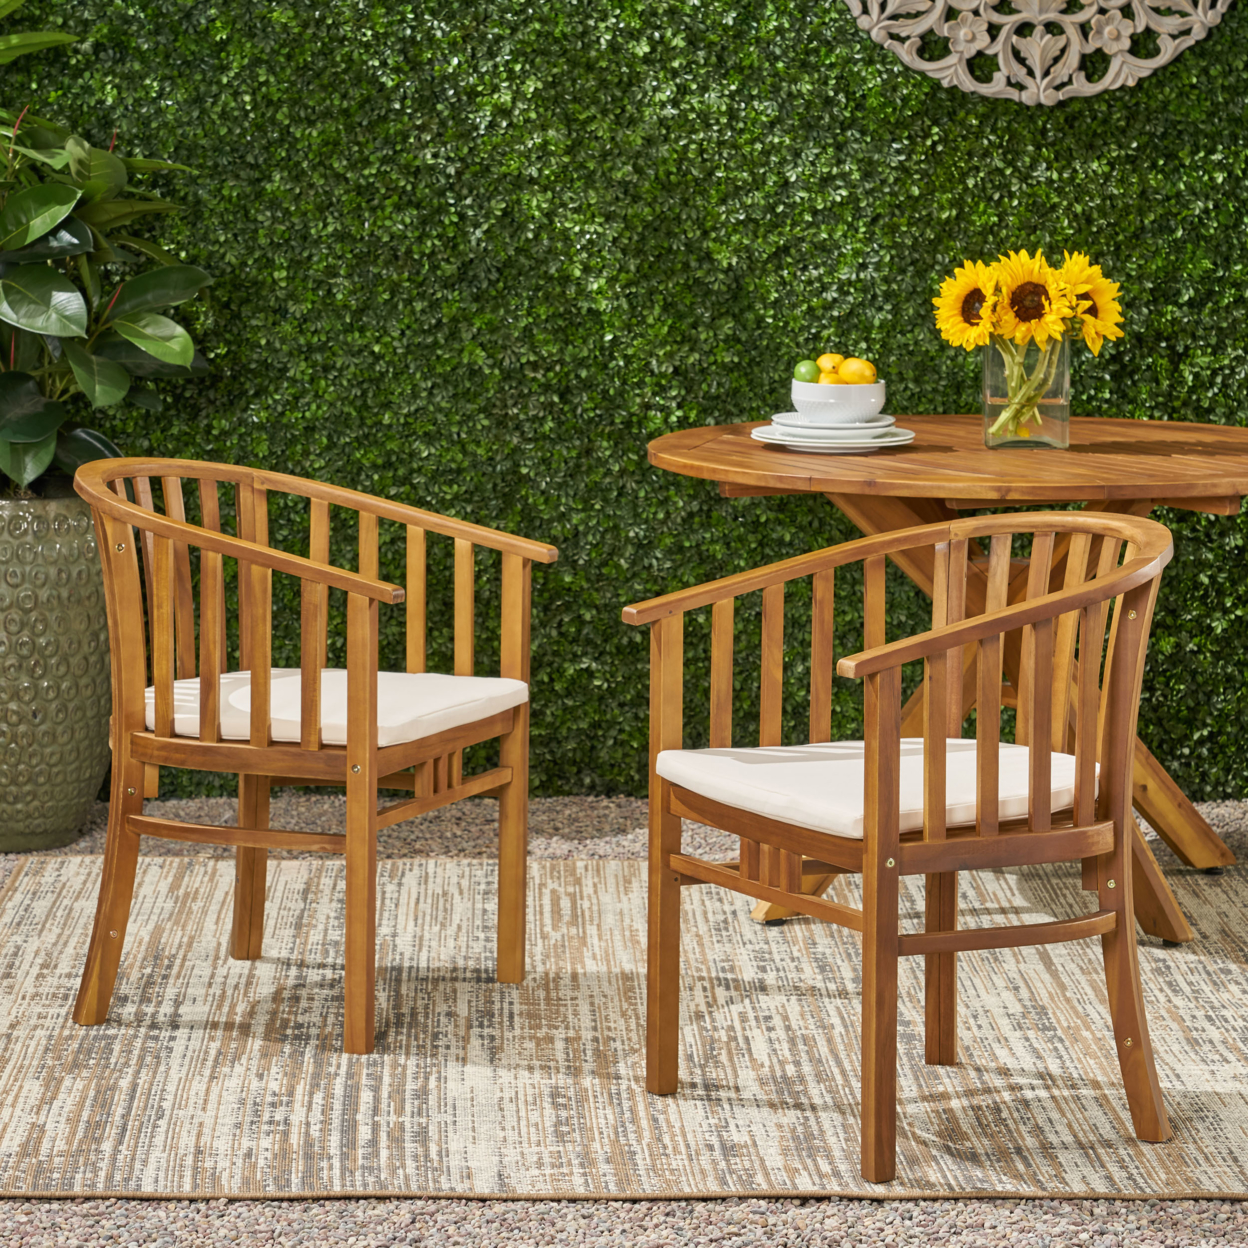 Nola Outdoor Wooden Dining Chairs With Cushions (Set Of 2) - Cream + Teak Finish